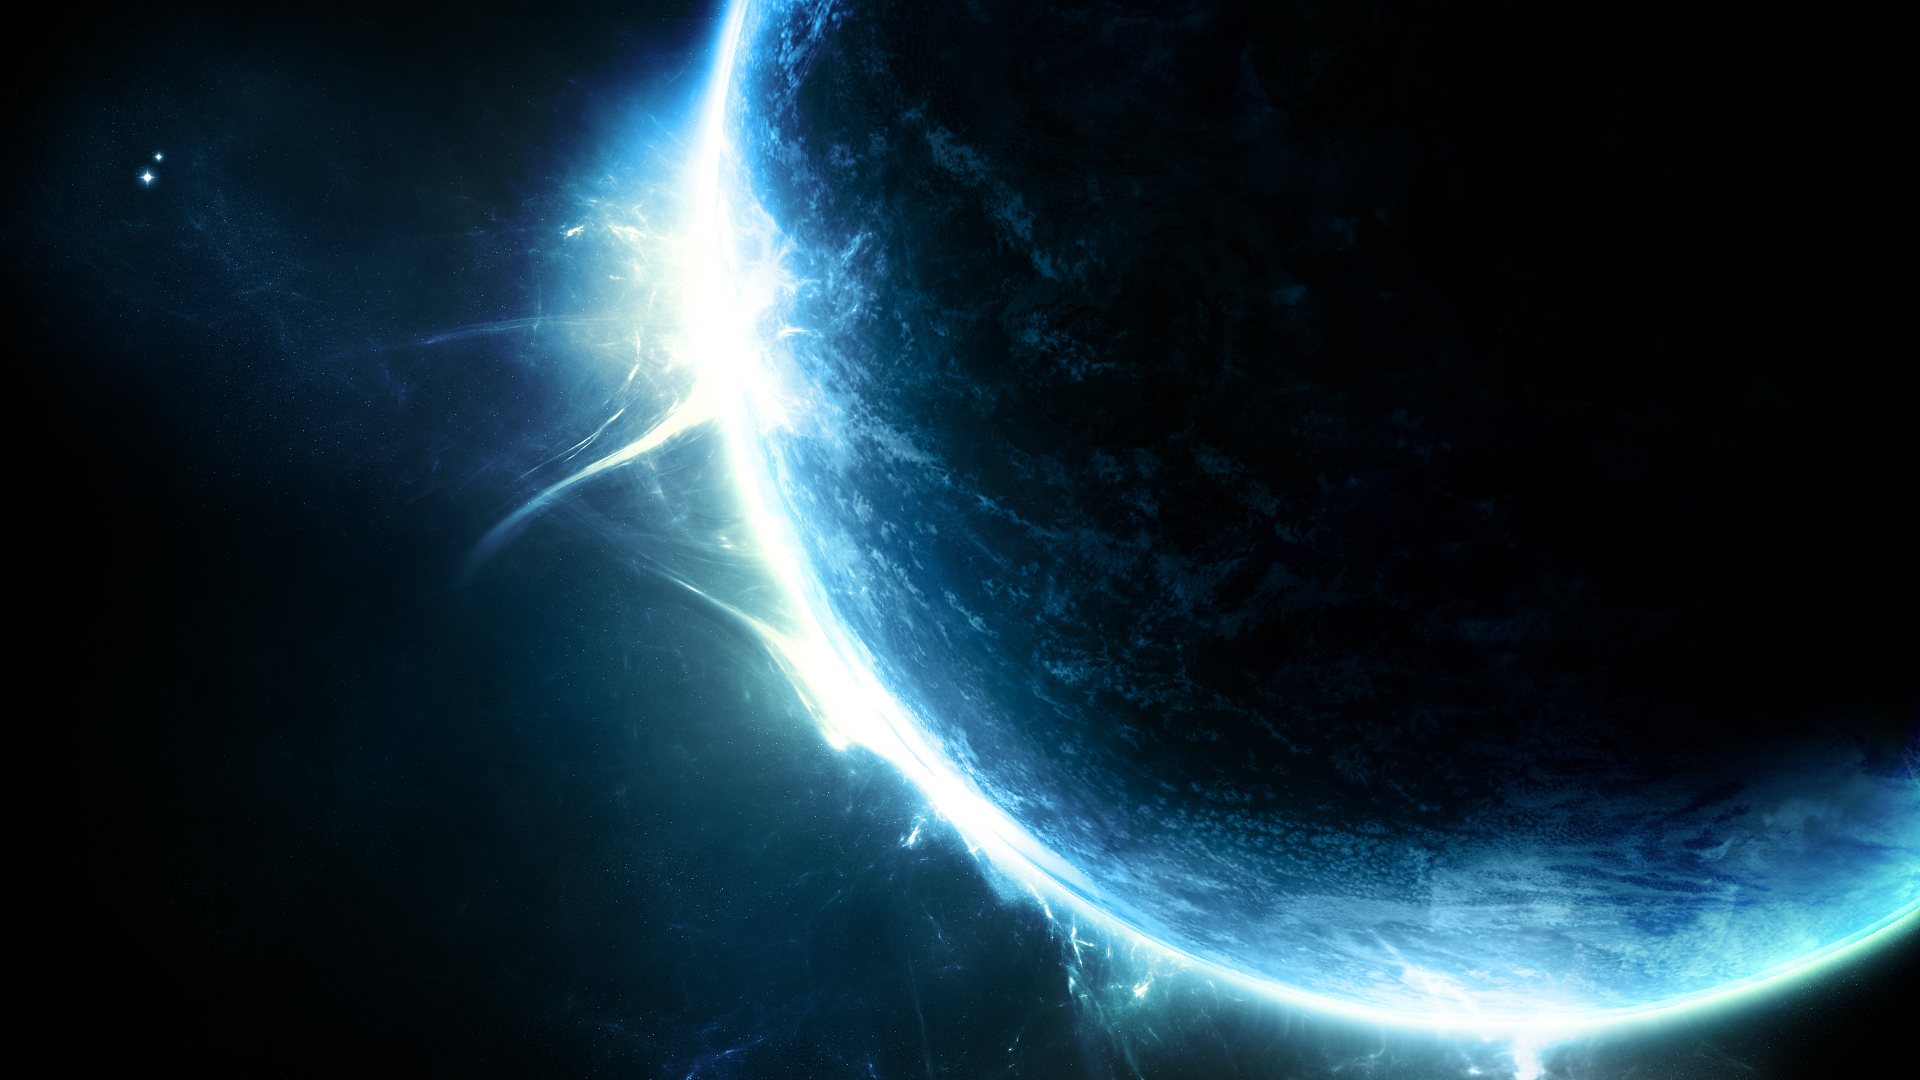 HD Wallpapers 1920x1080 Free  Cool desktop backgrounds, Planets